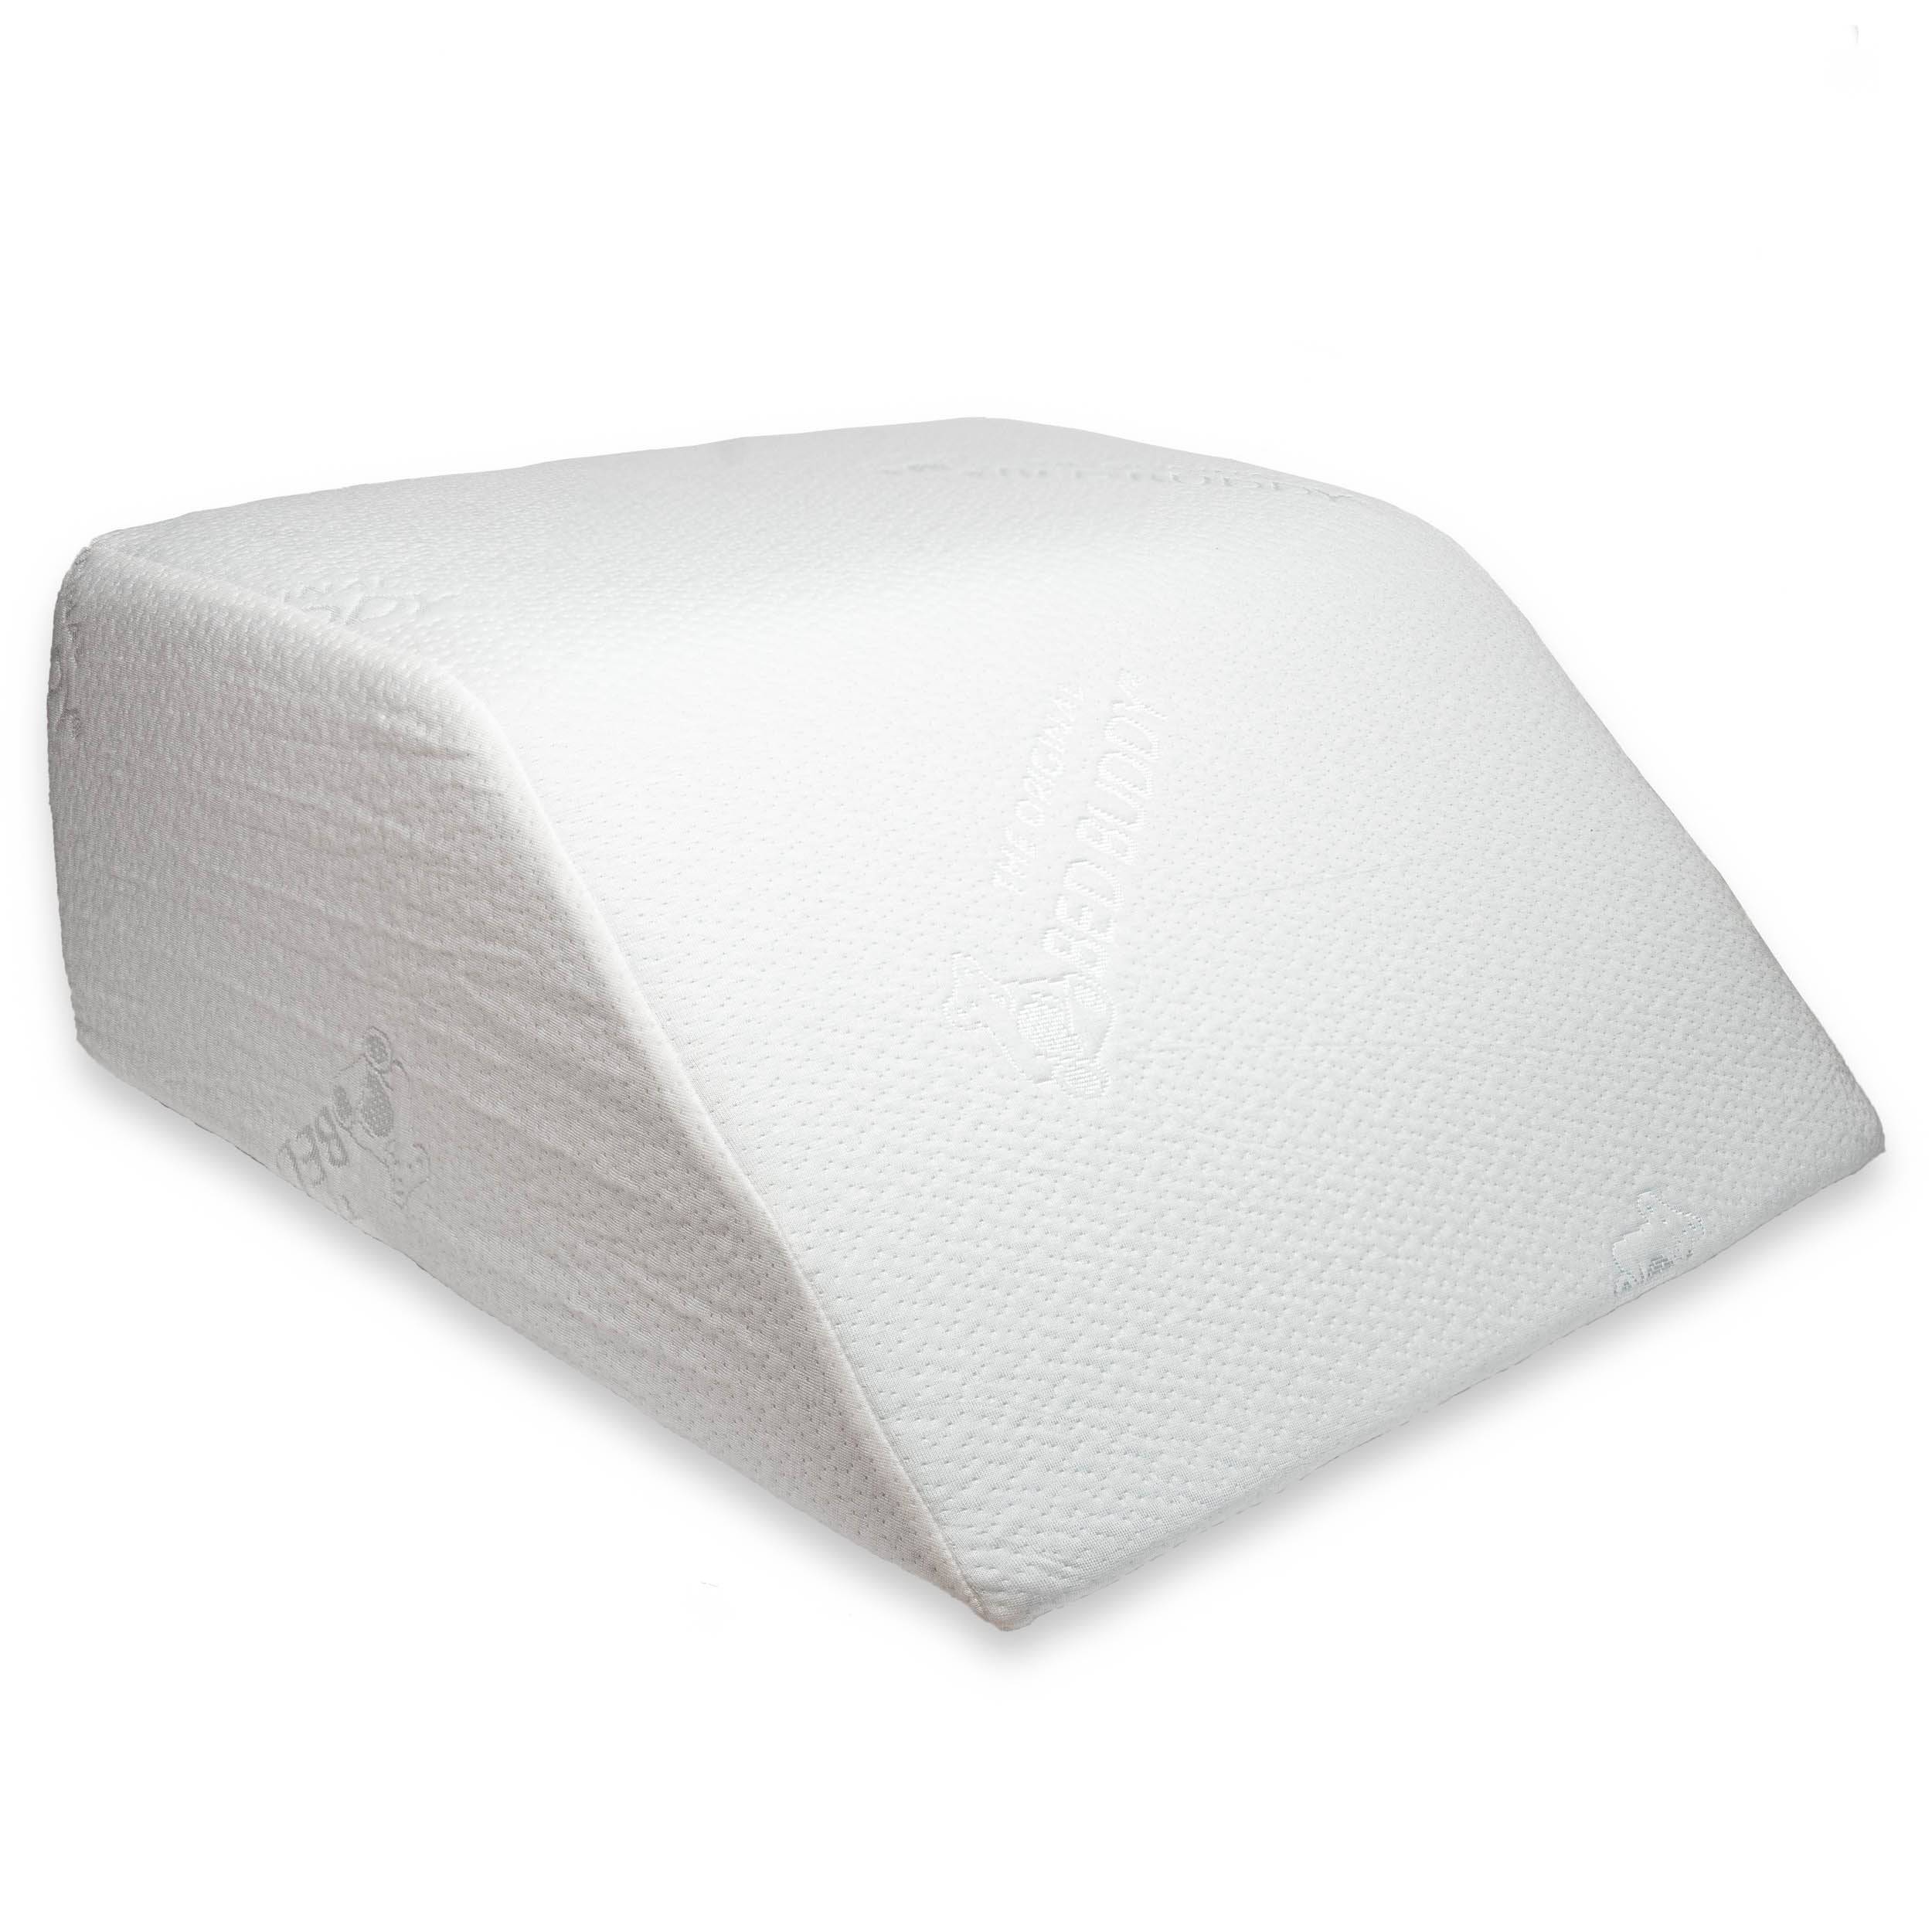 Carex Wedge Pillow for Sleeping - Bed Wedge Pillow for Sleeping at An